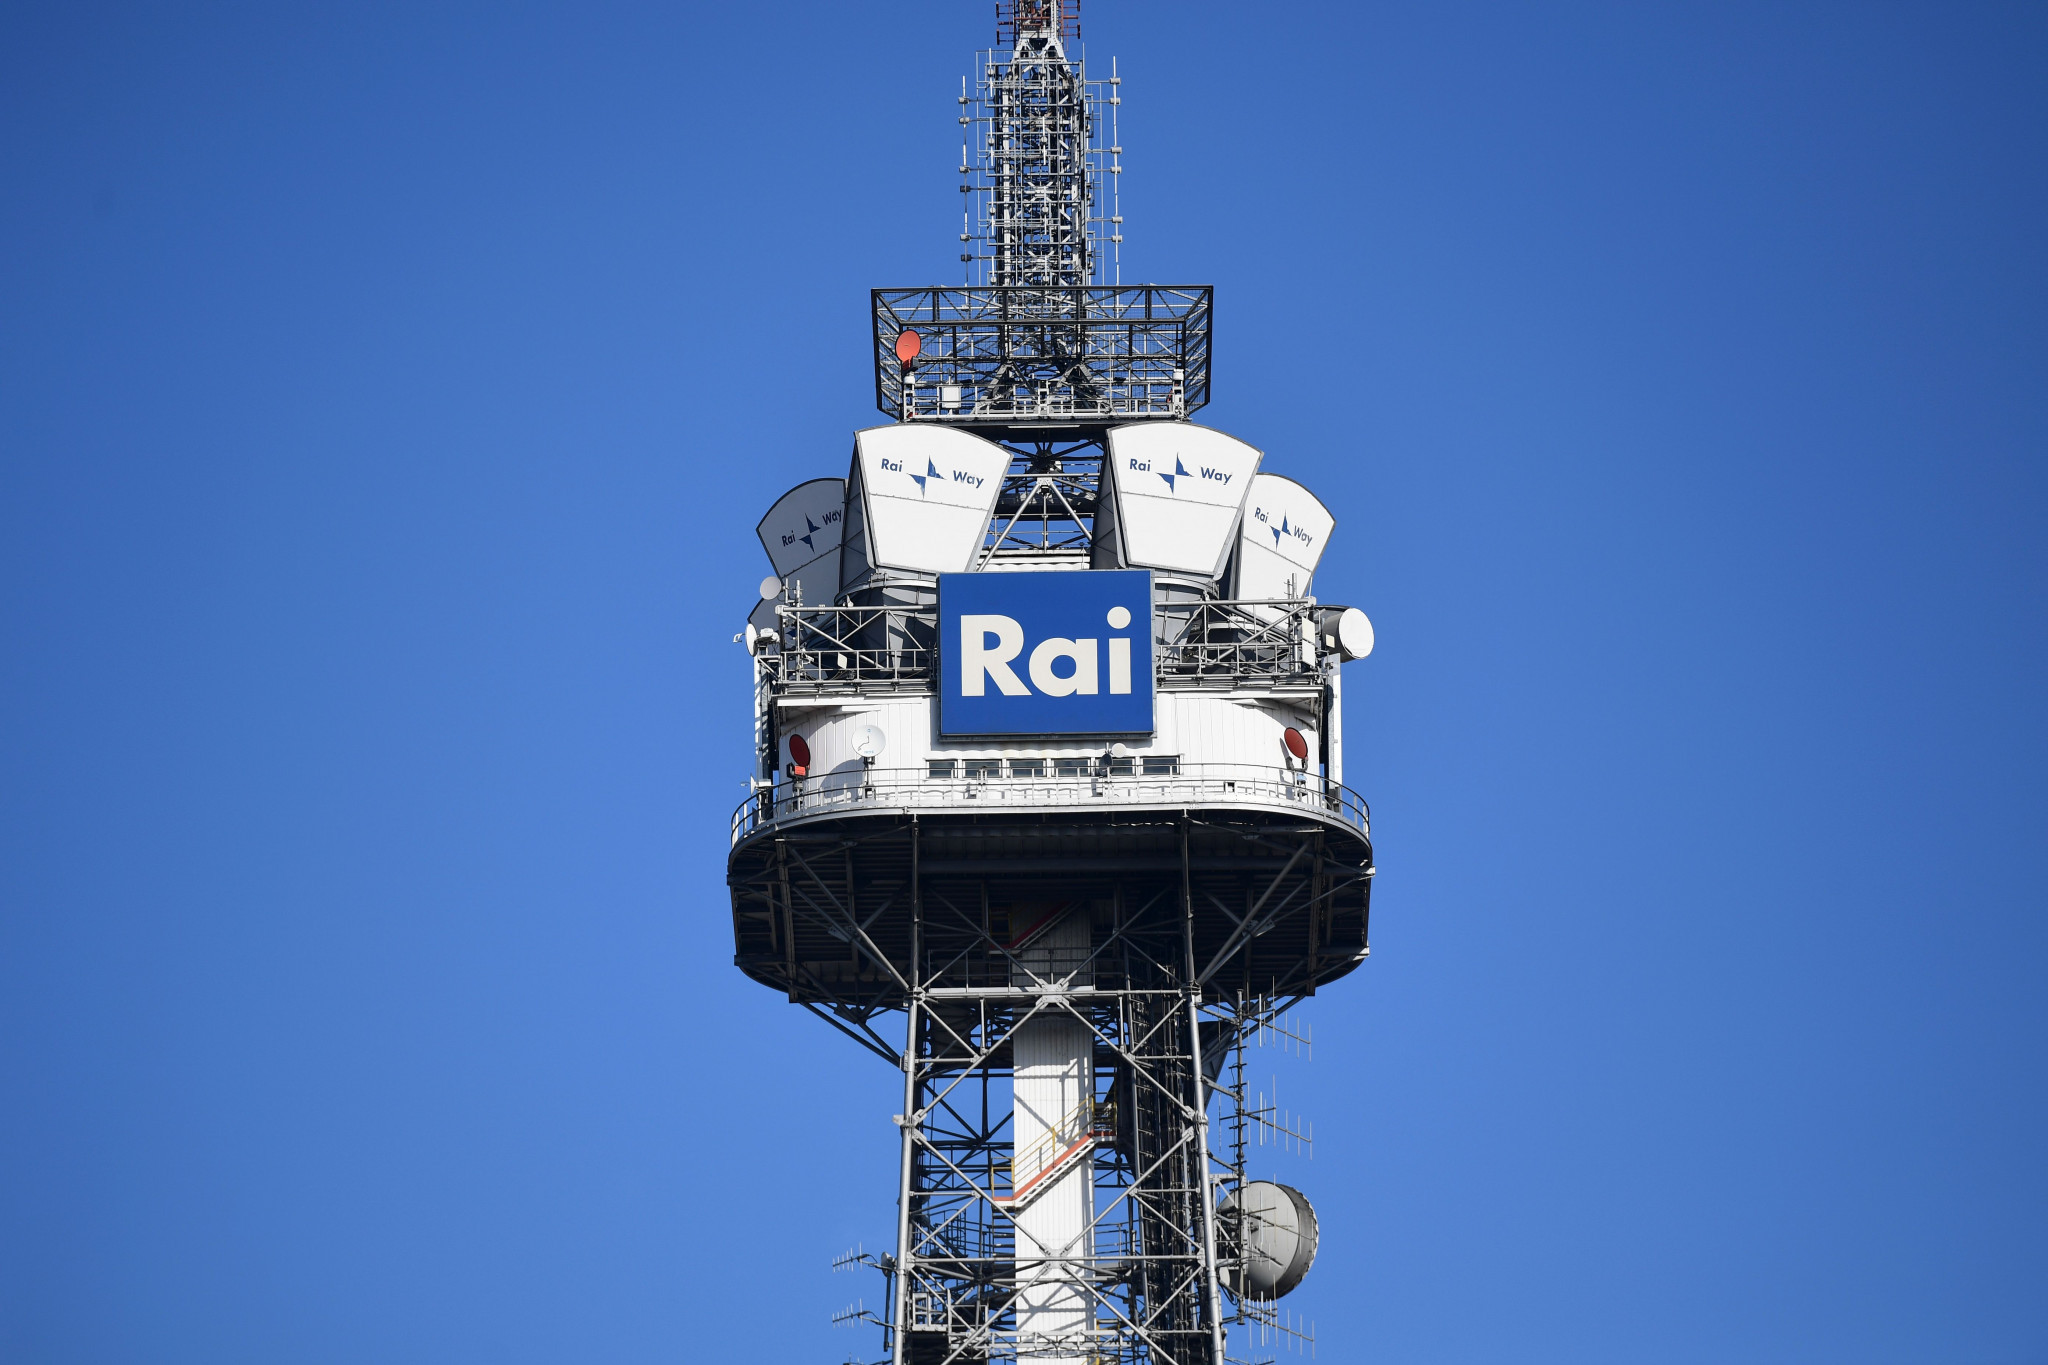 Antonio Marano worked for Rai, Italy's state-owned broadcaster, for many years ©Getty Images